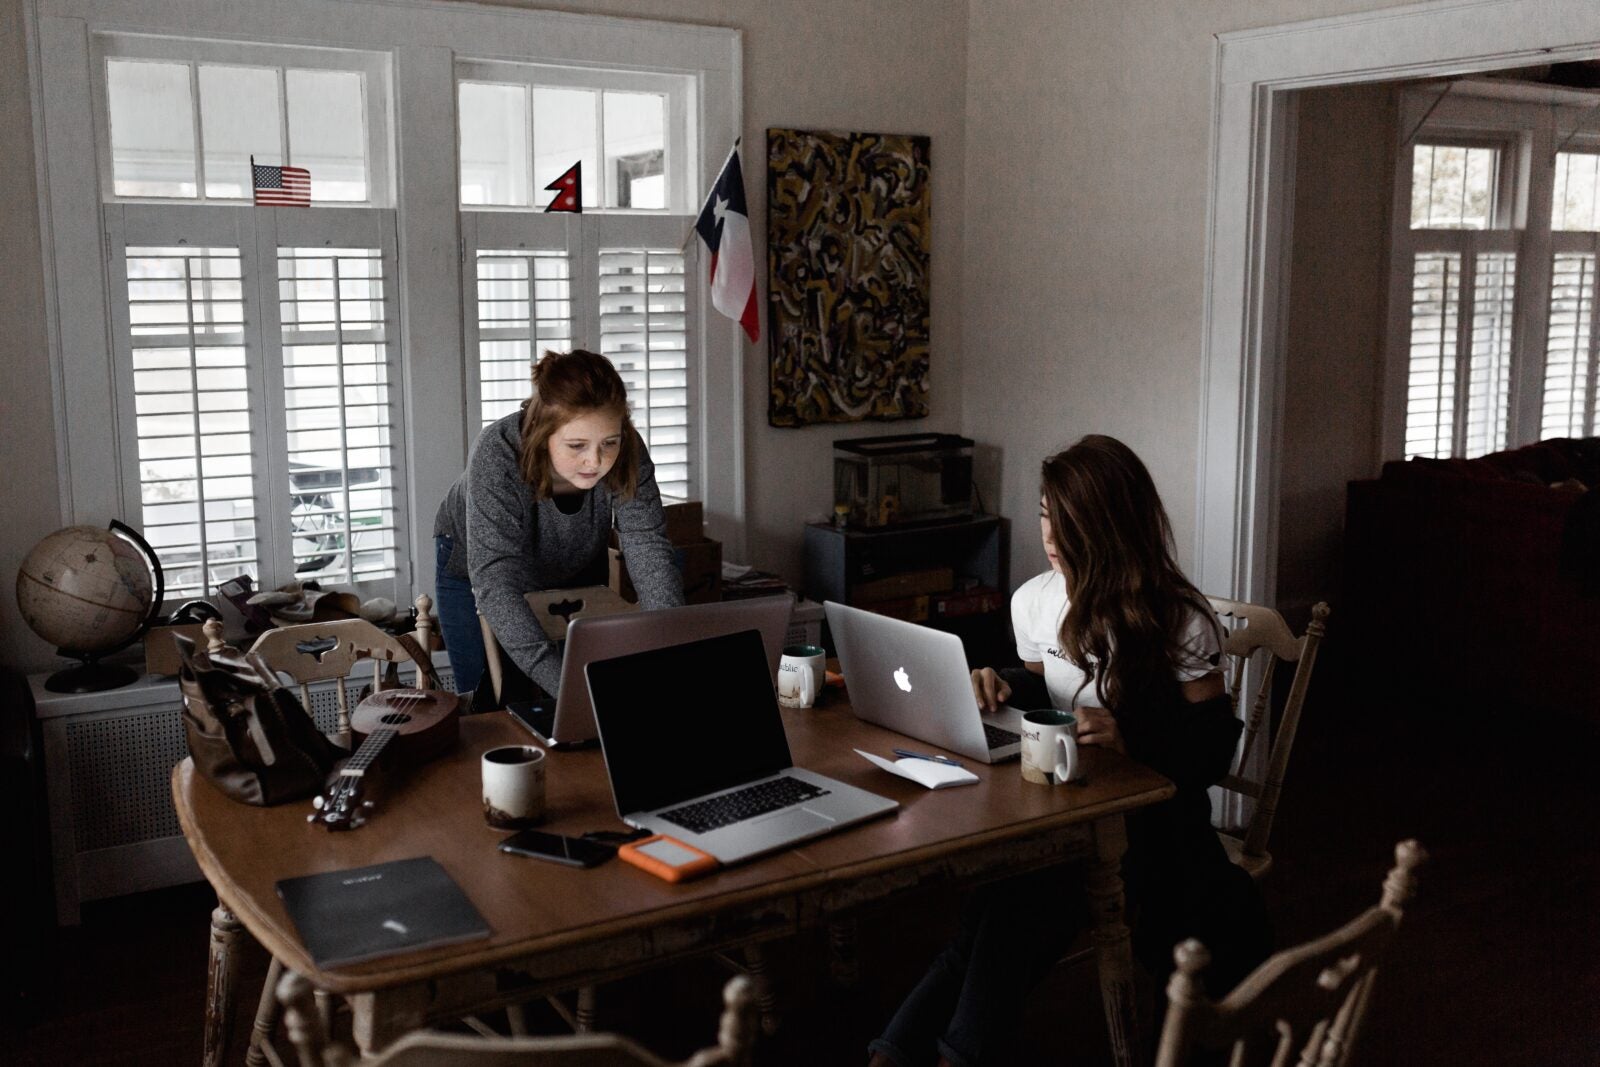 Two girls sitting in the dining room of their home and doing work on their laptops.